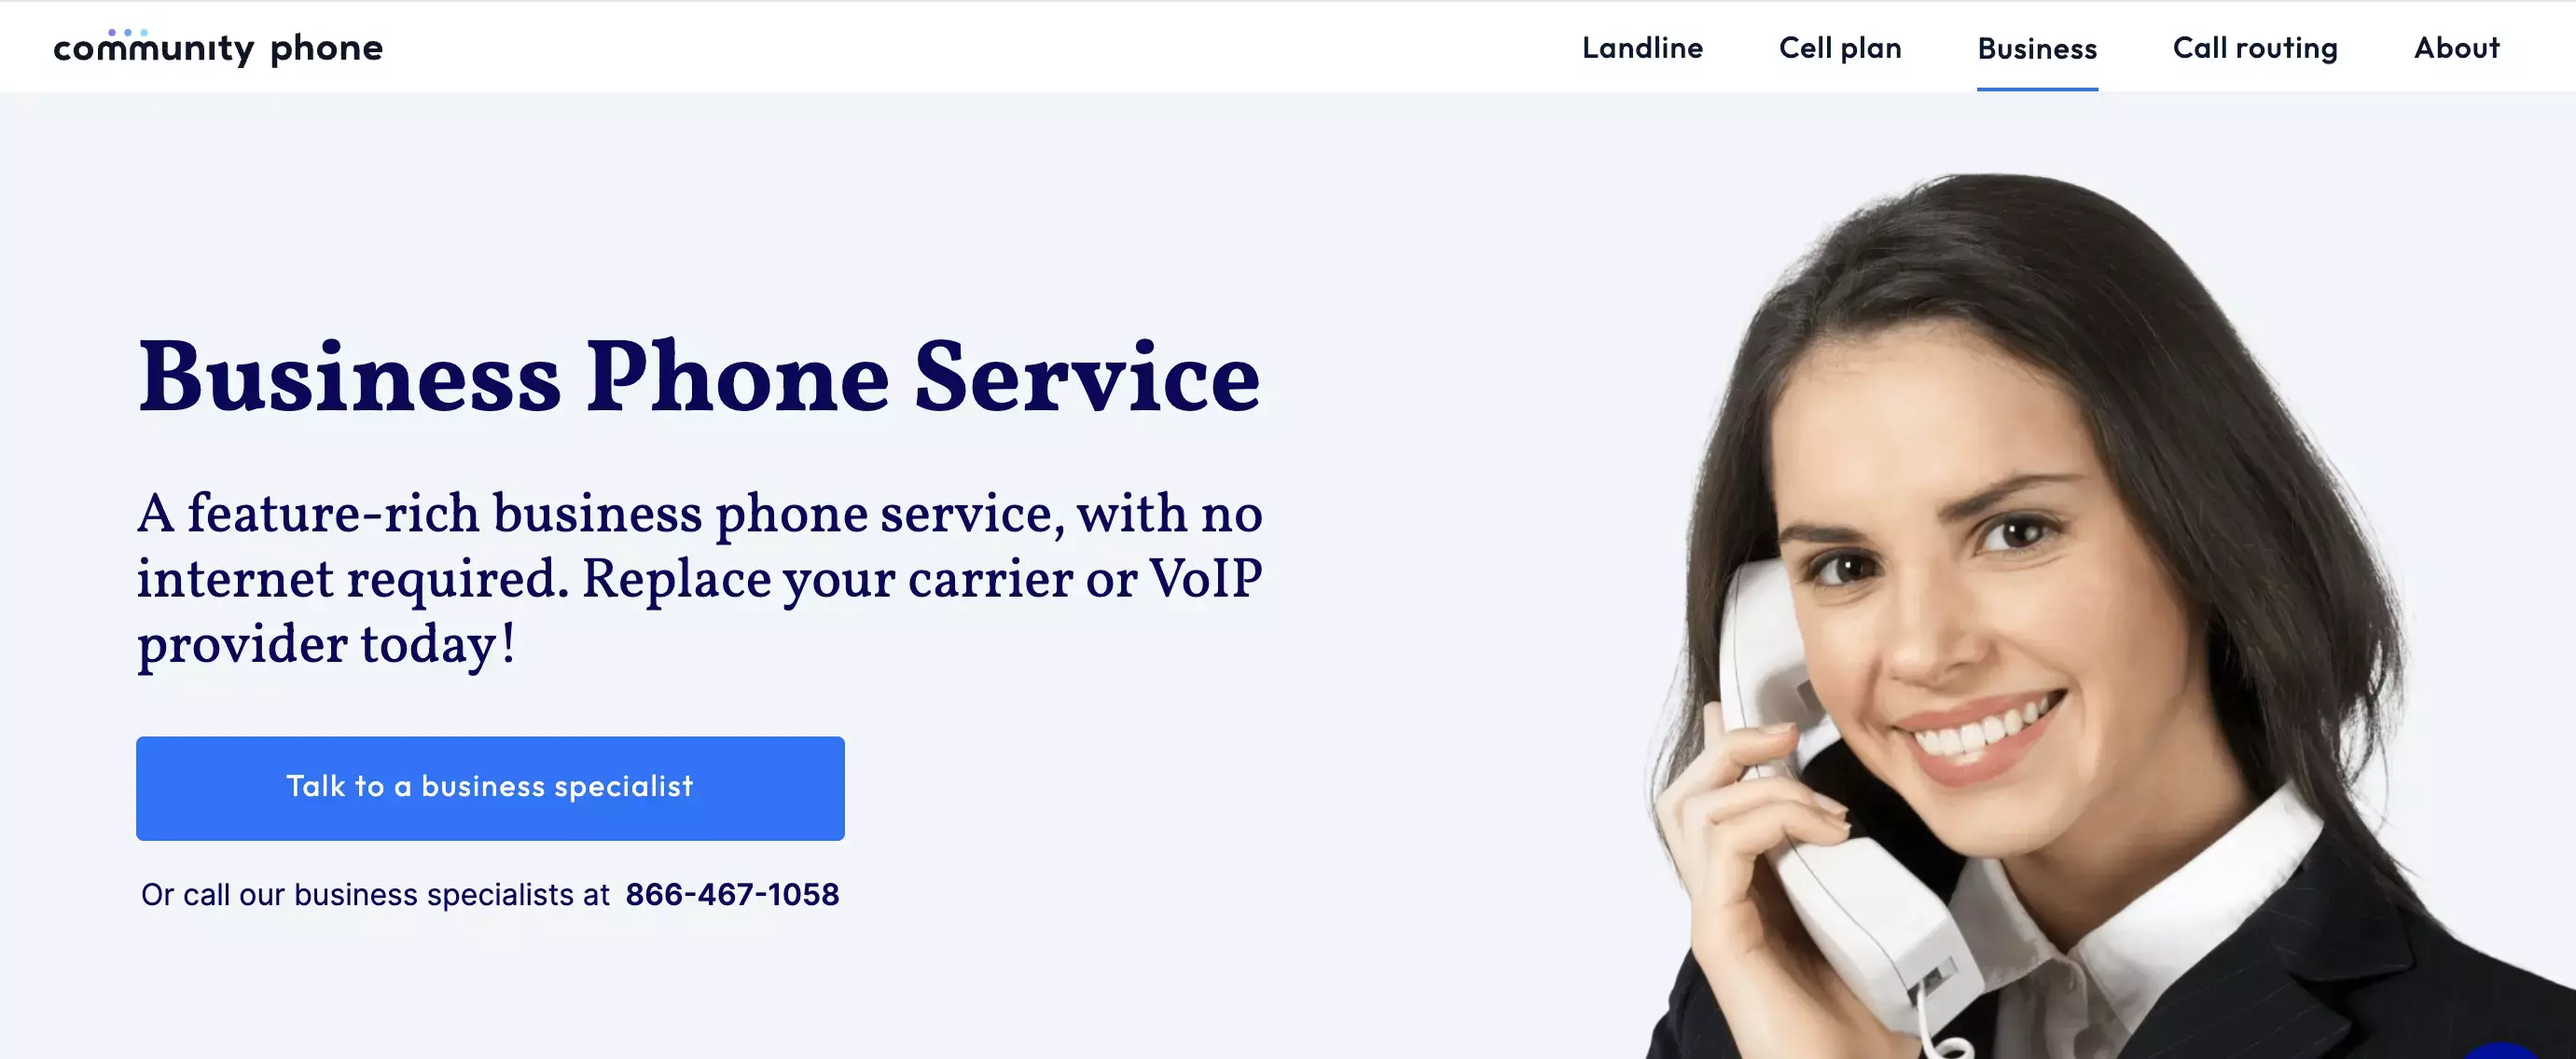 Image of Community Phone Business service provider